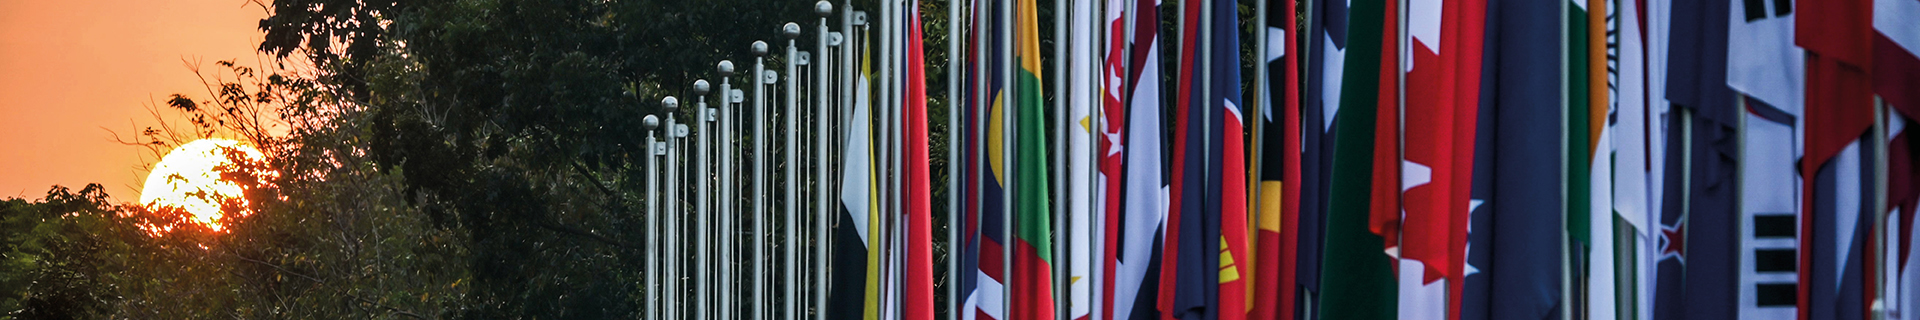 43rd ASEAN Summit: Development plans overshadowed by persistent thorny issues